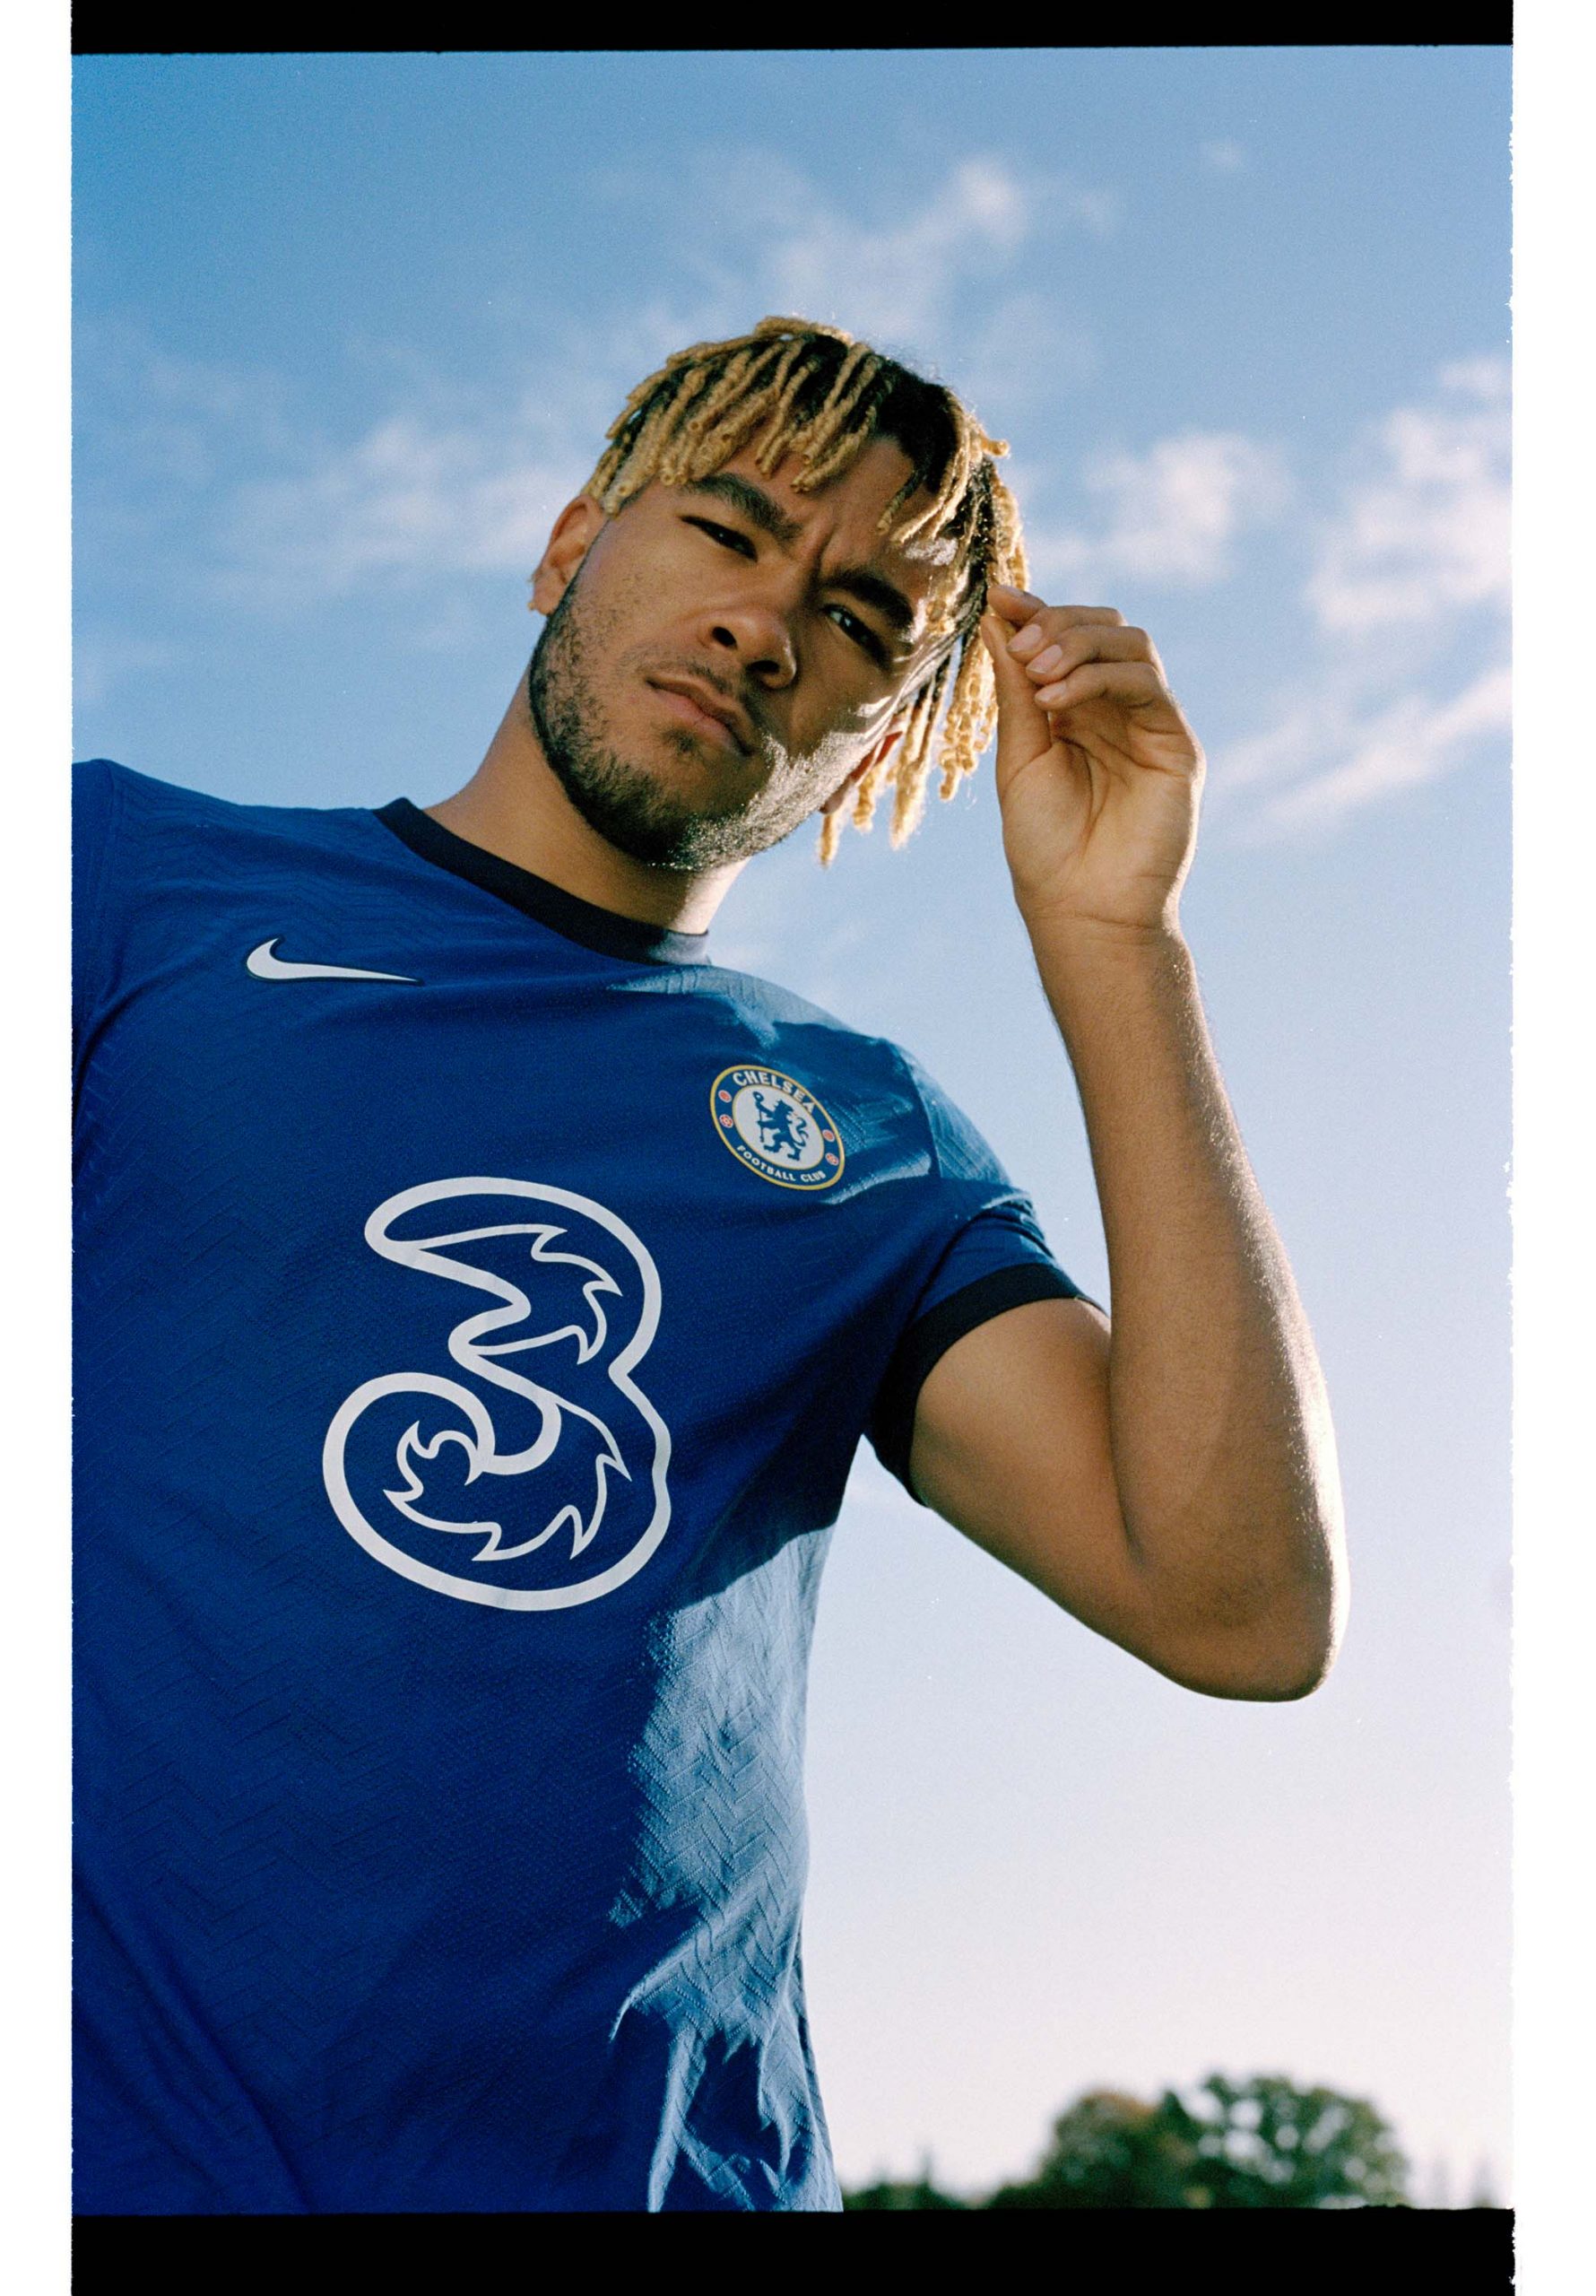 Nike x Chelsea FC - Making Pictures